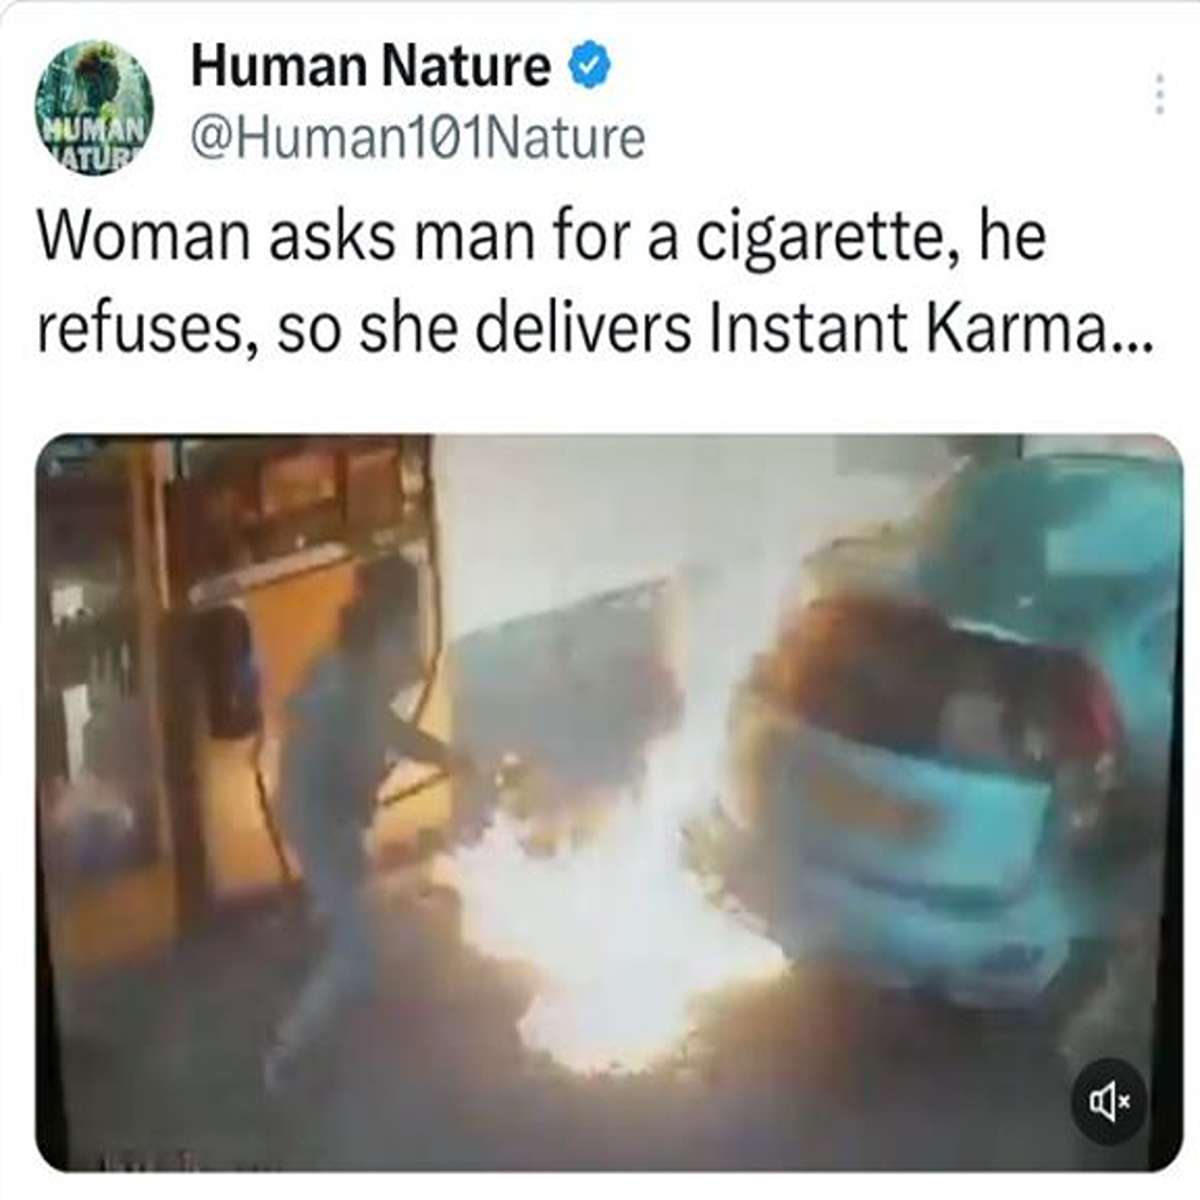 delusional people - water - Human Nature Human Woman asks man for a cigarette, he refuses, so she delivers Instant Karma...